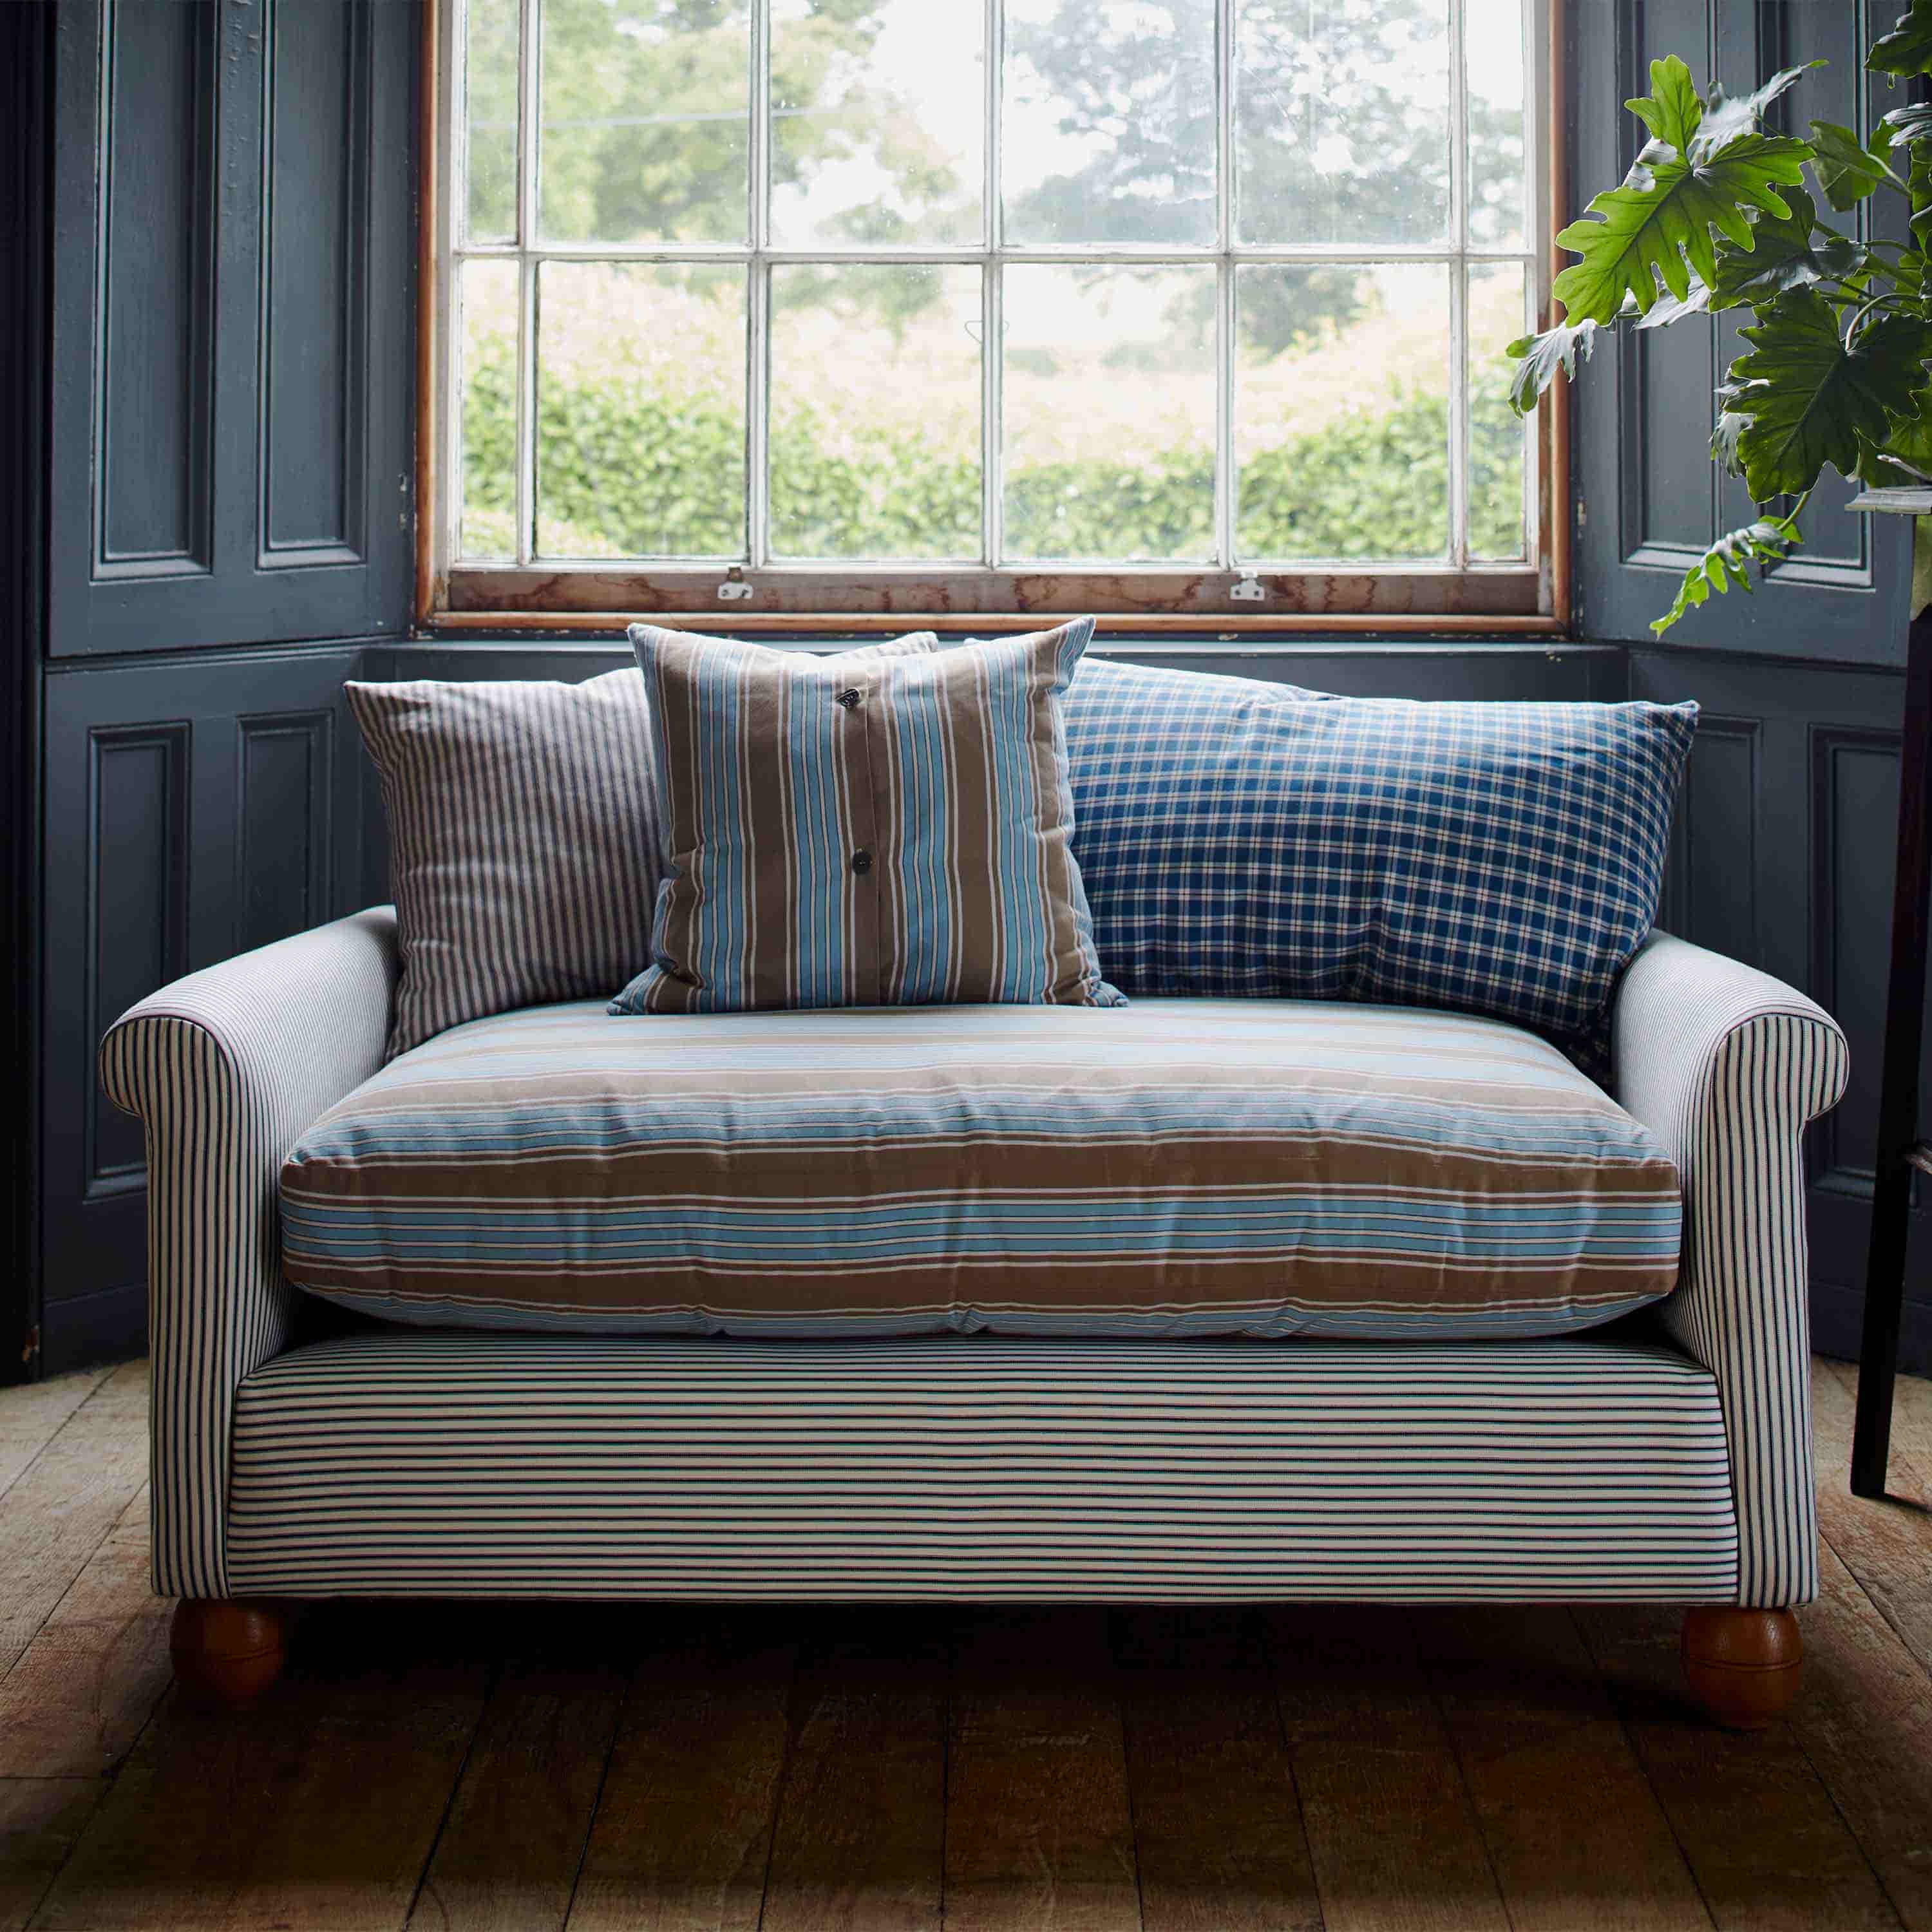  Idler 2 Seater Sofa in Laidback Linen Shadow 